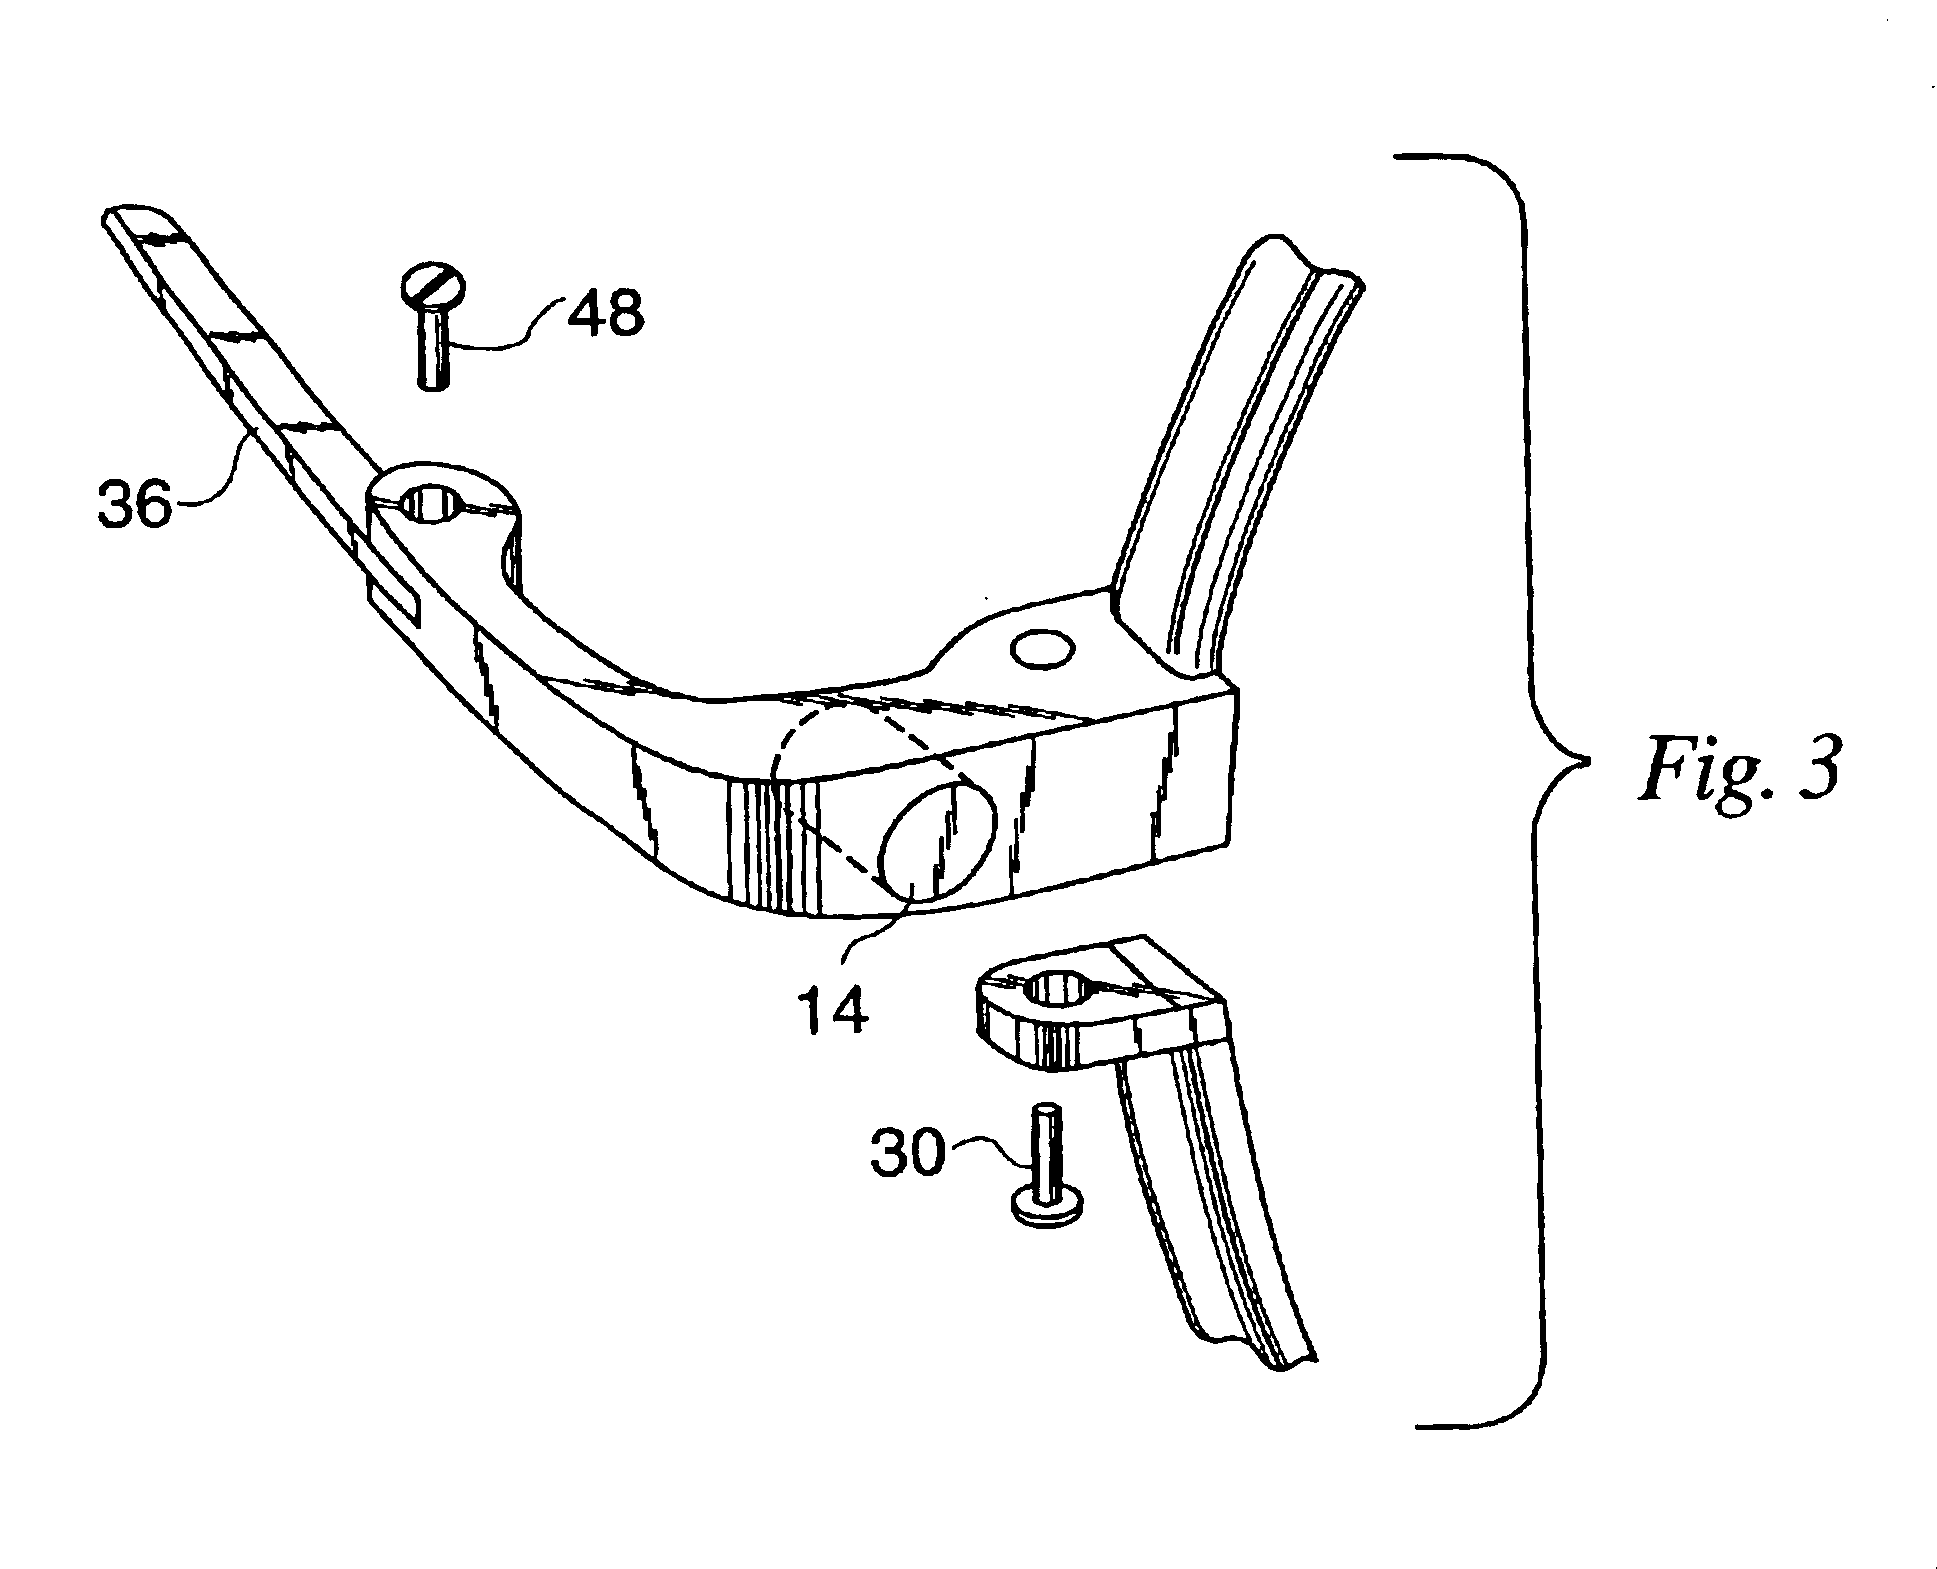 Frame construction for eyewear having removable auxiliary lenses